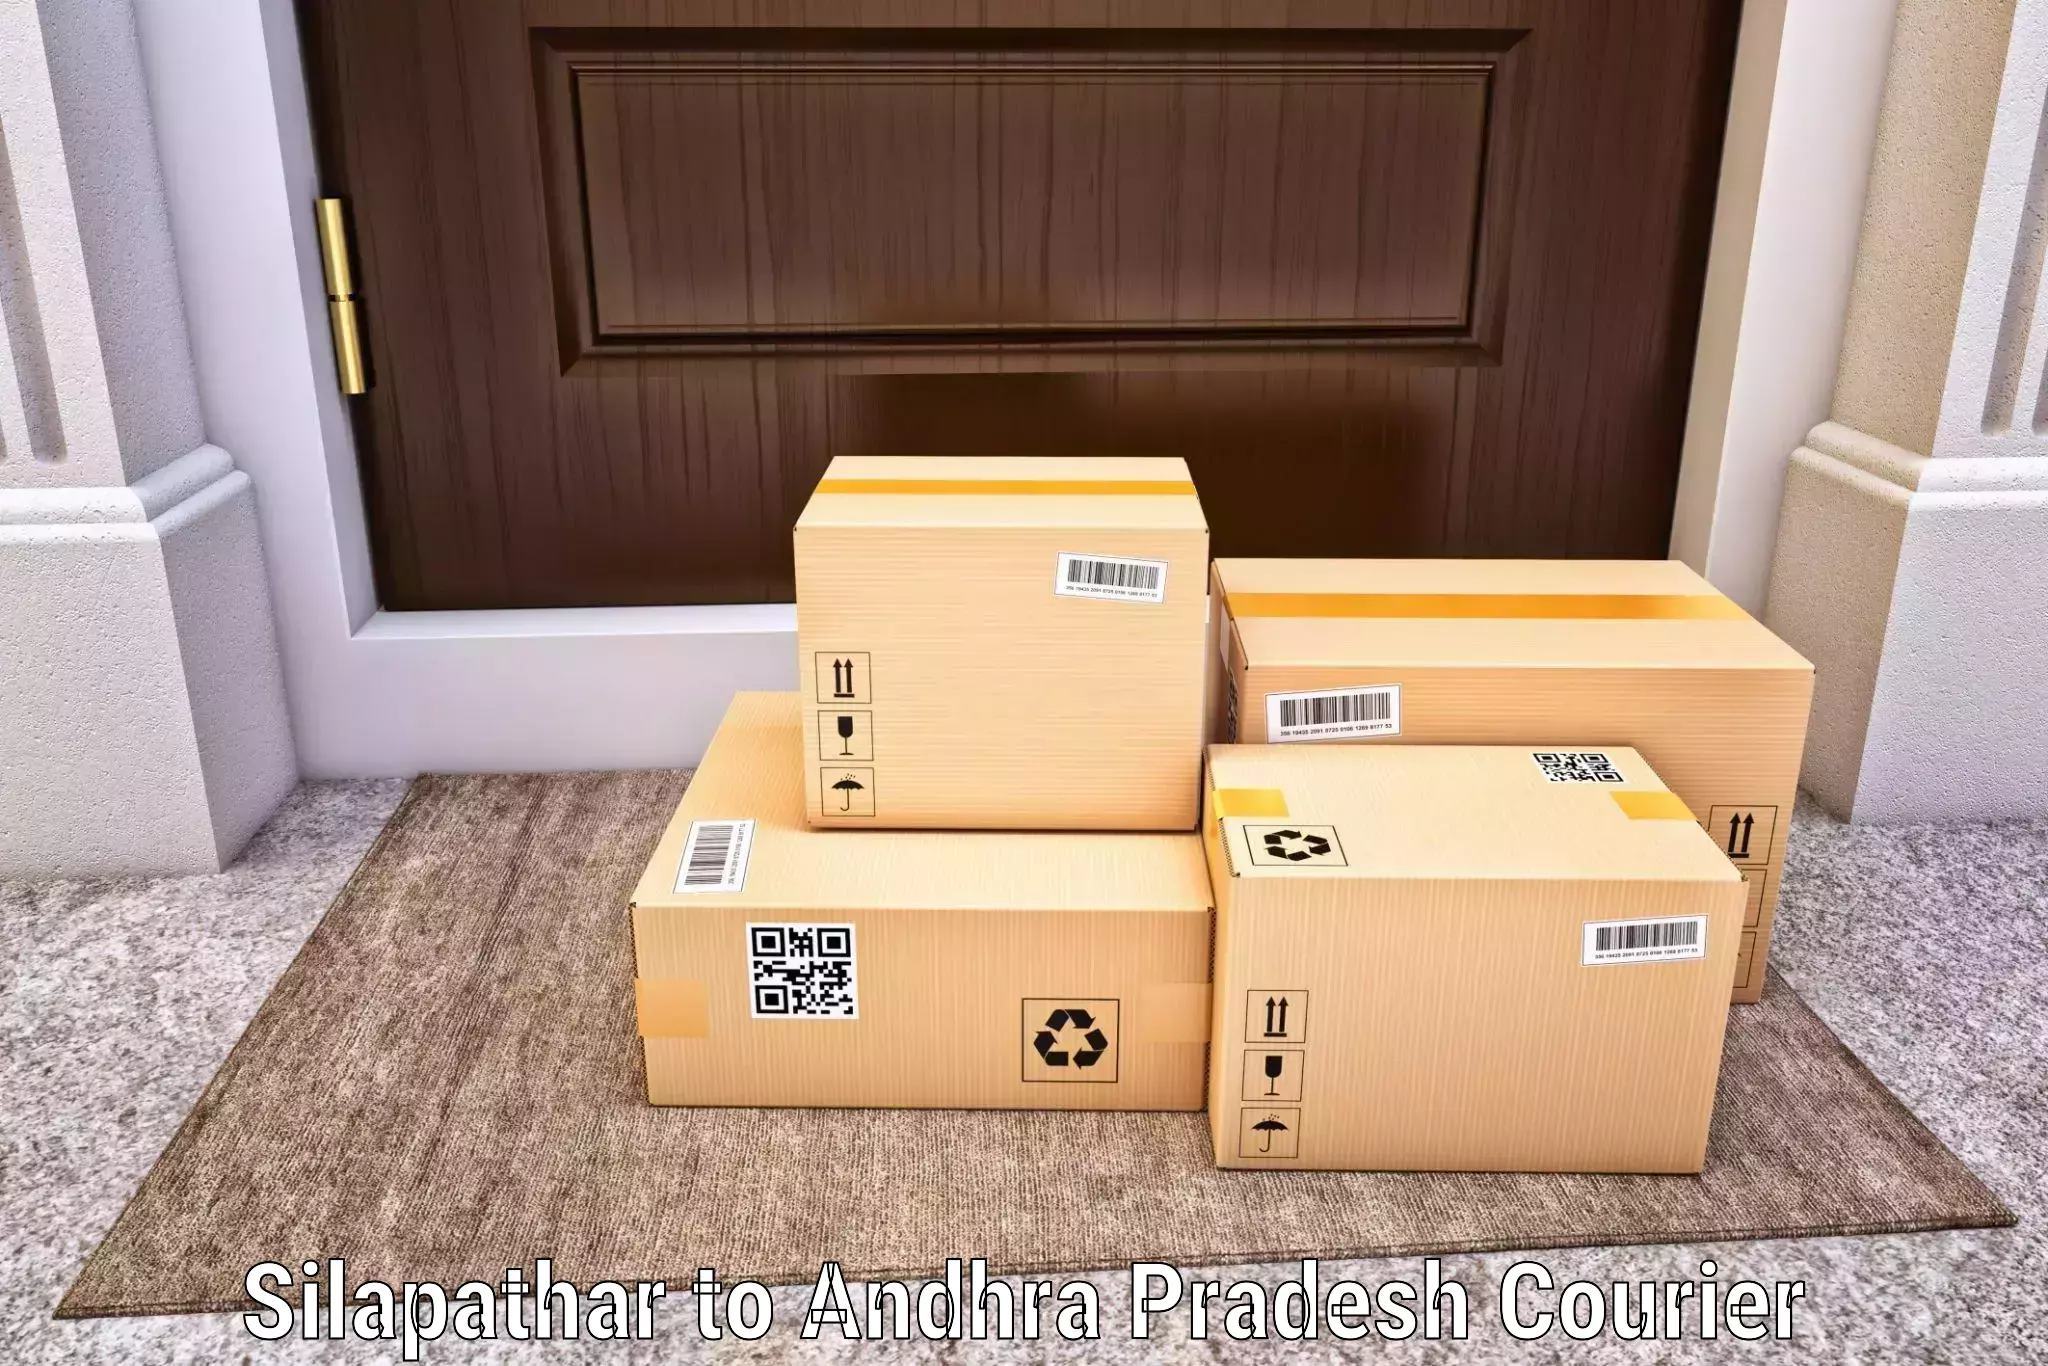 Round-the-clock parcel delivery Silapathar to Puttur Tirupati